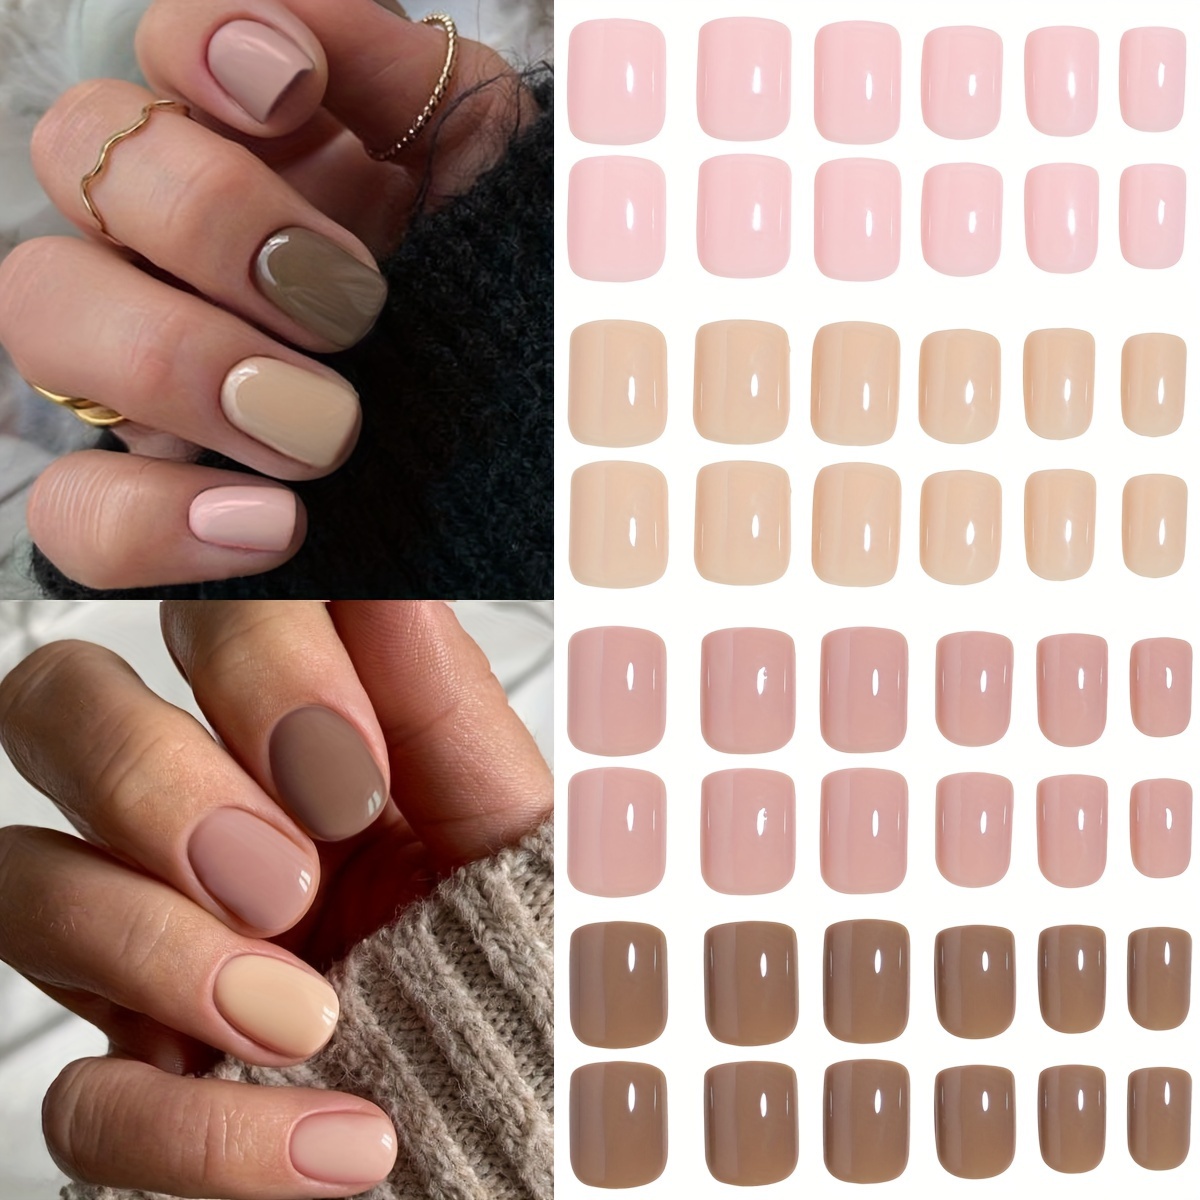 

96pcs 4 Different Nude Colors Glossy Wearable Nail Art Lovely Short Square Fake Nails Detachable Finished False Nails Press On Nails With Storage Box New Year Nail Decorations For Women And Girls